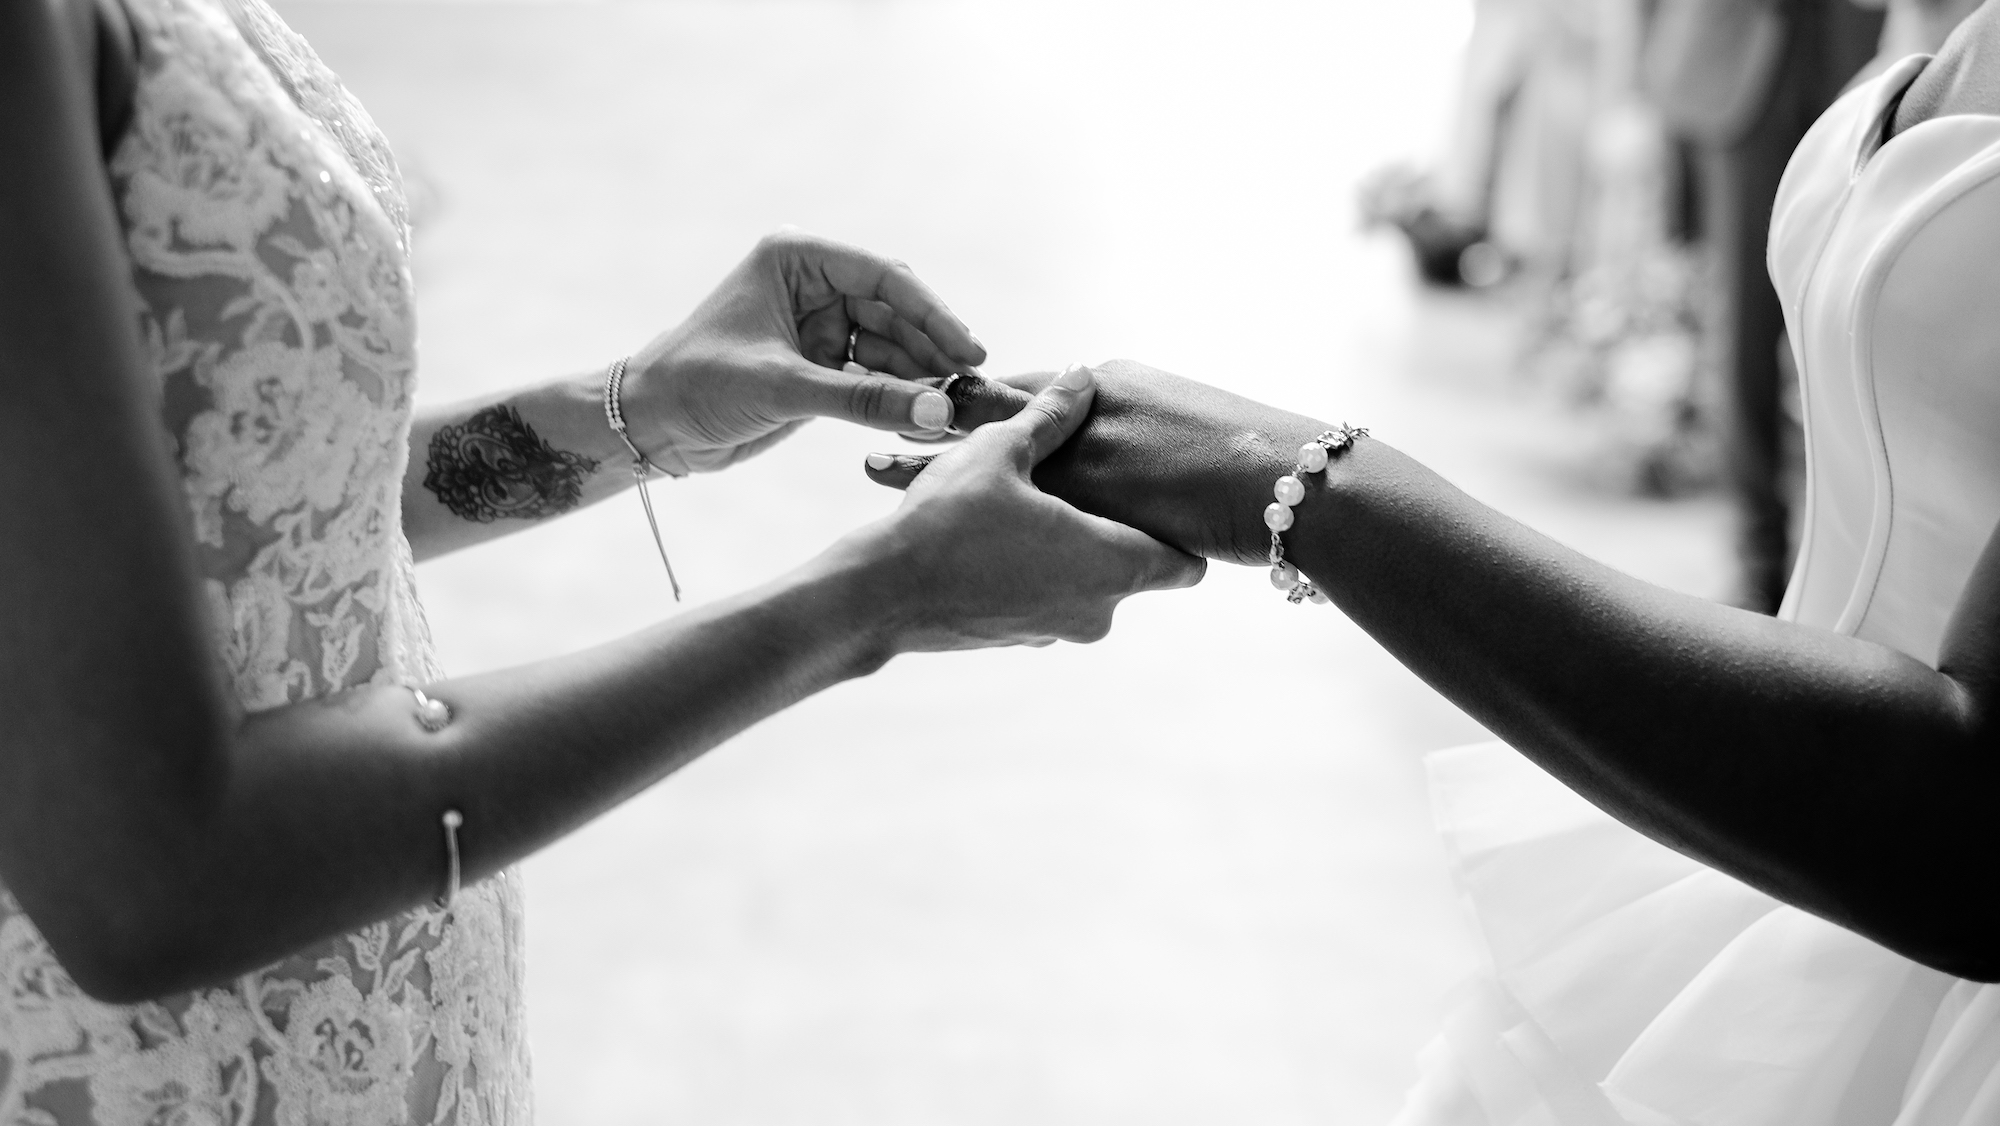 the arms and hands of one woman placing a wedding ring on the hand of another